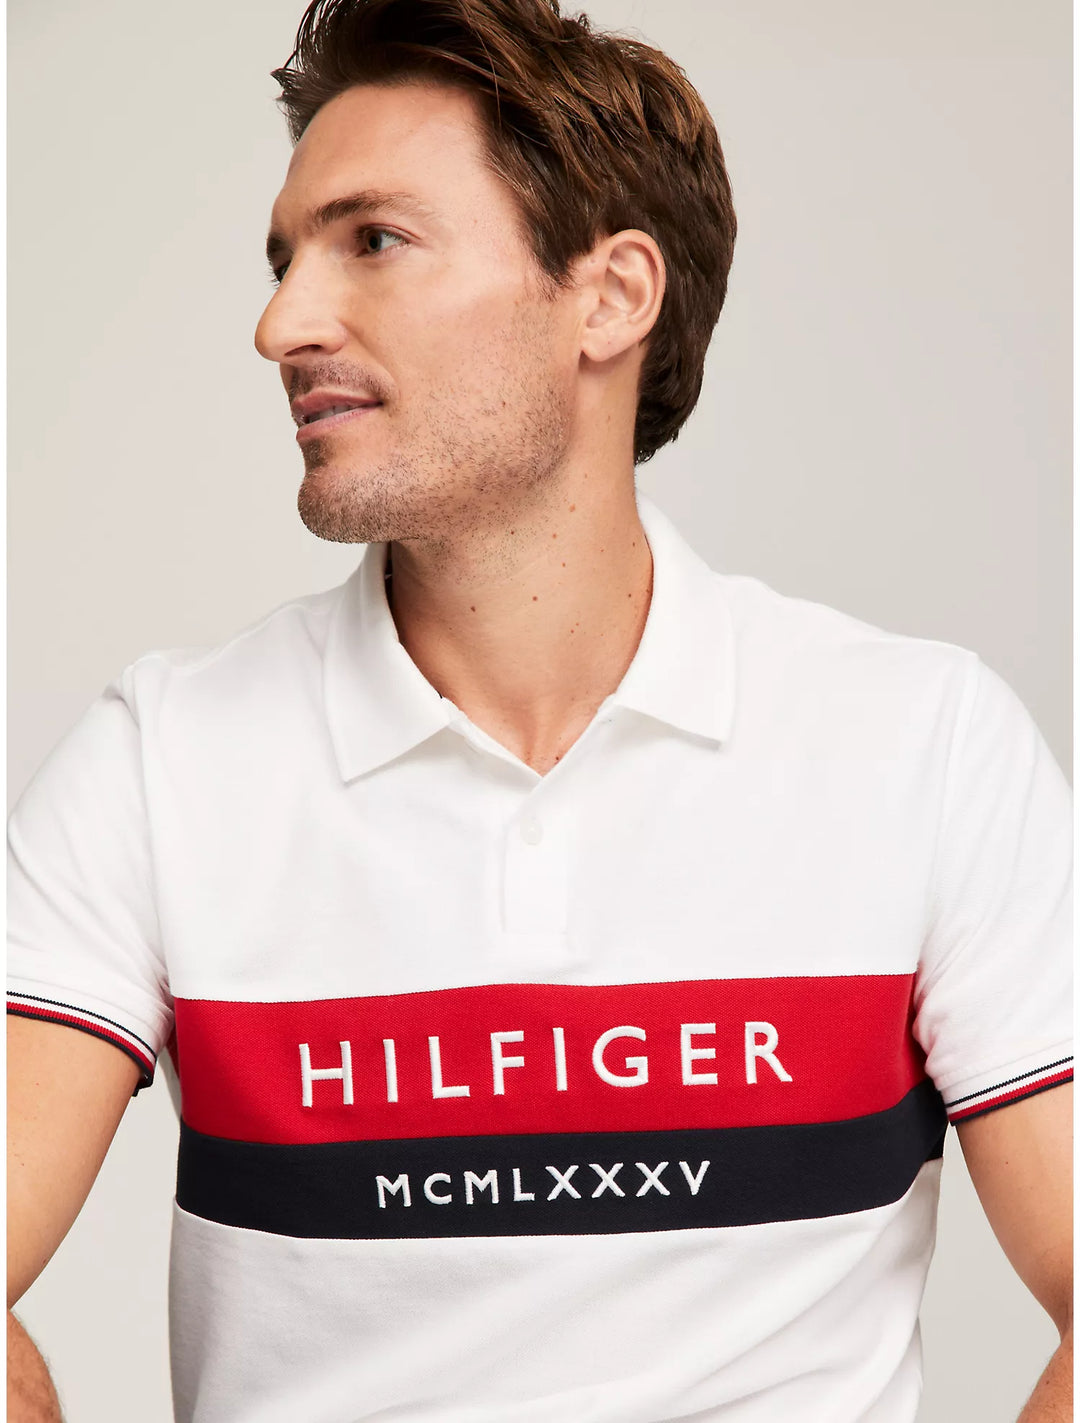 Tommy Hilfiger Mens S/S Polo AT-78J9452